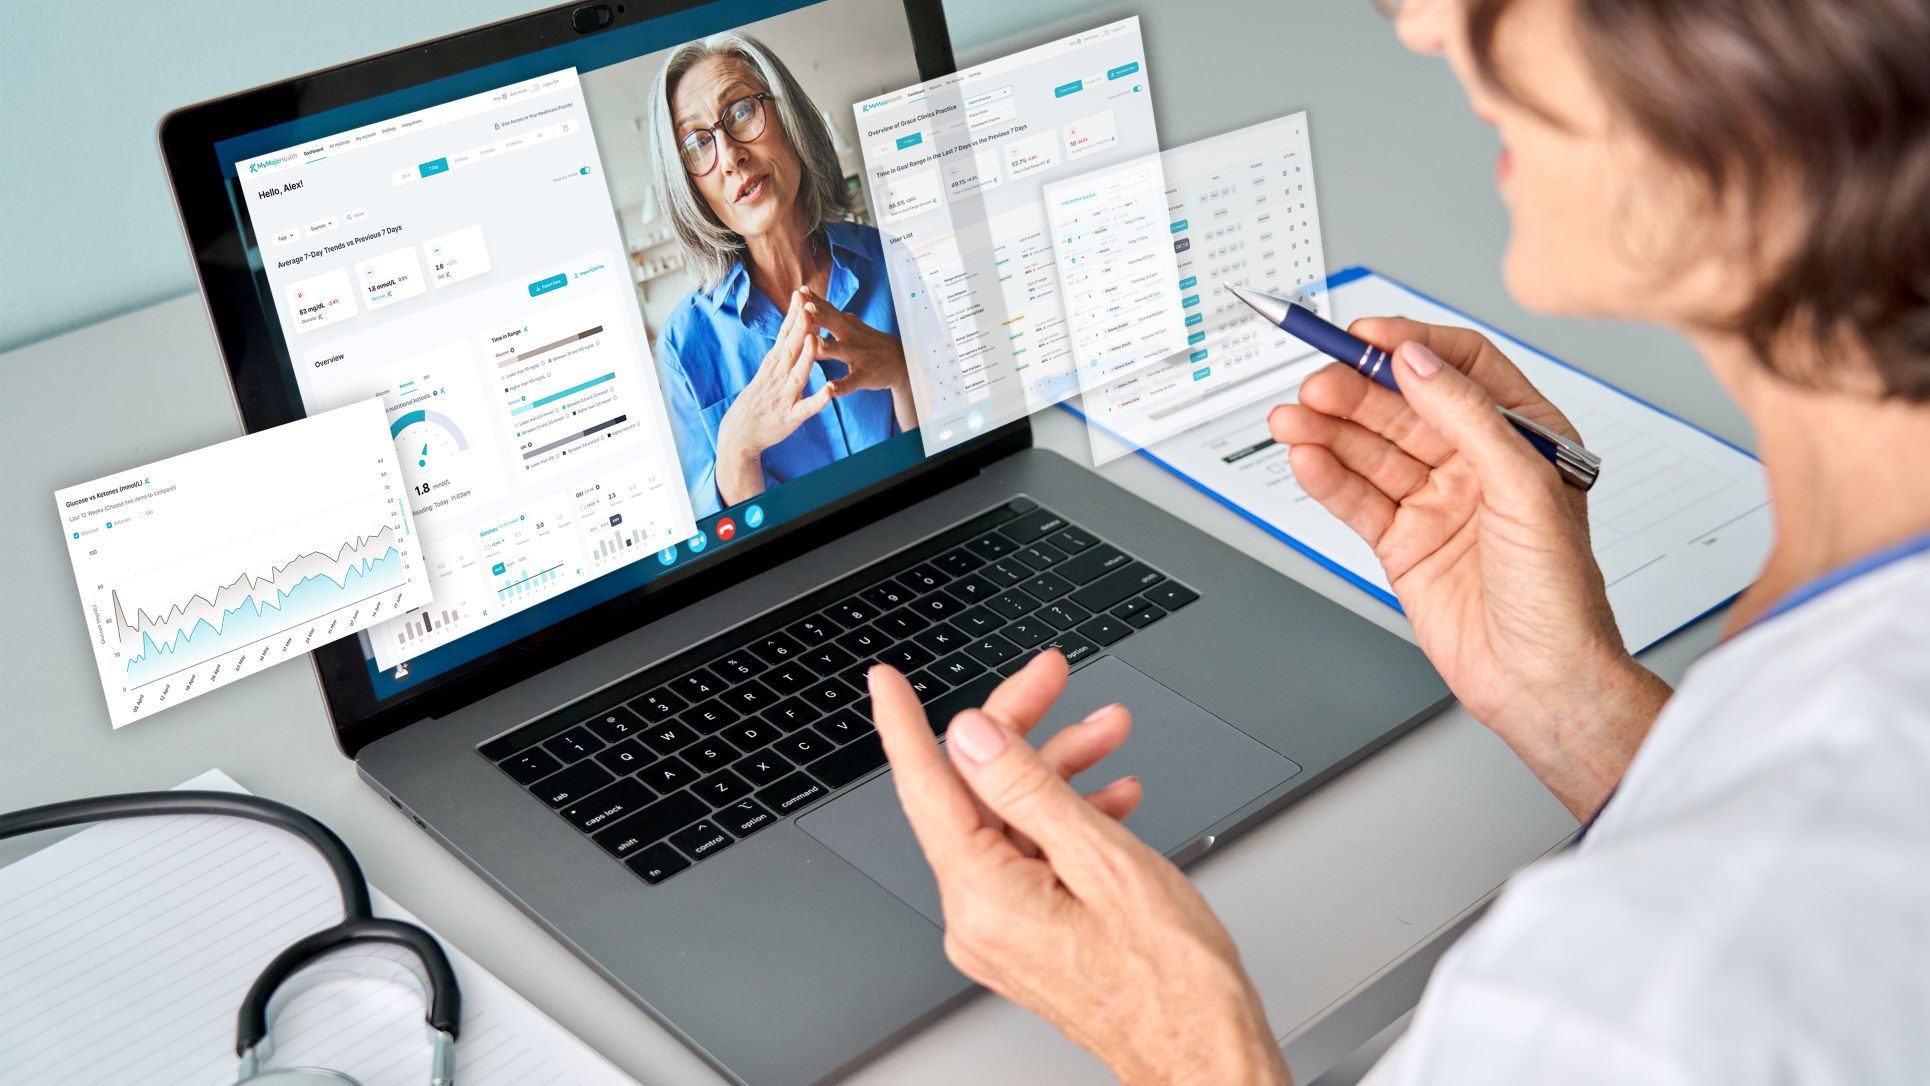 Real-time data allows healthcare practitioners to better monitor patient health.